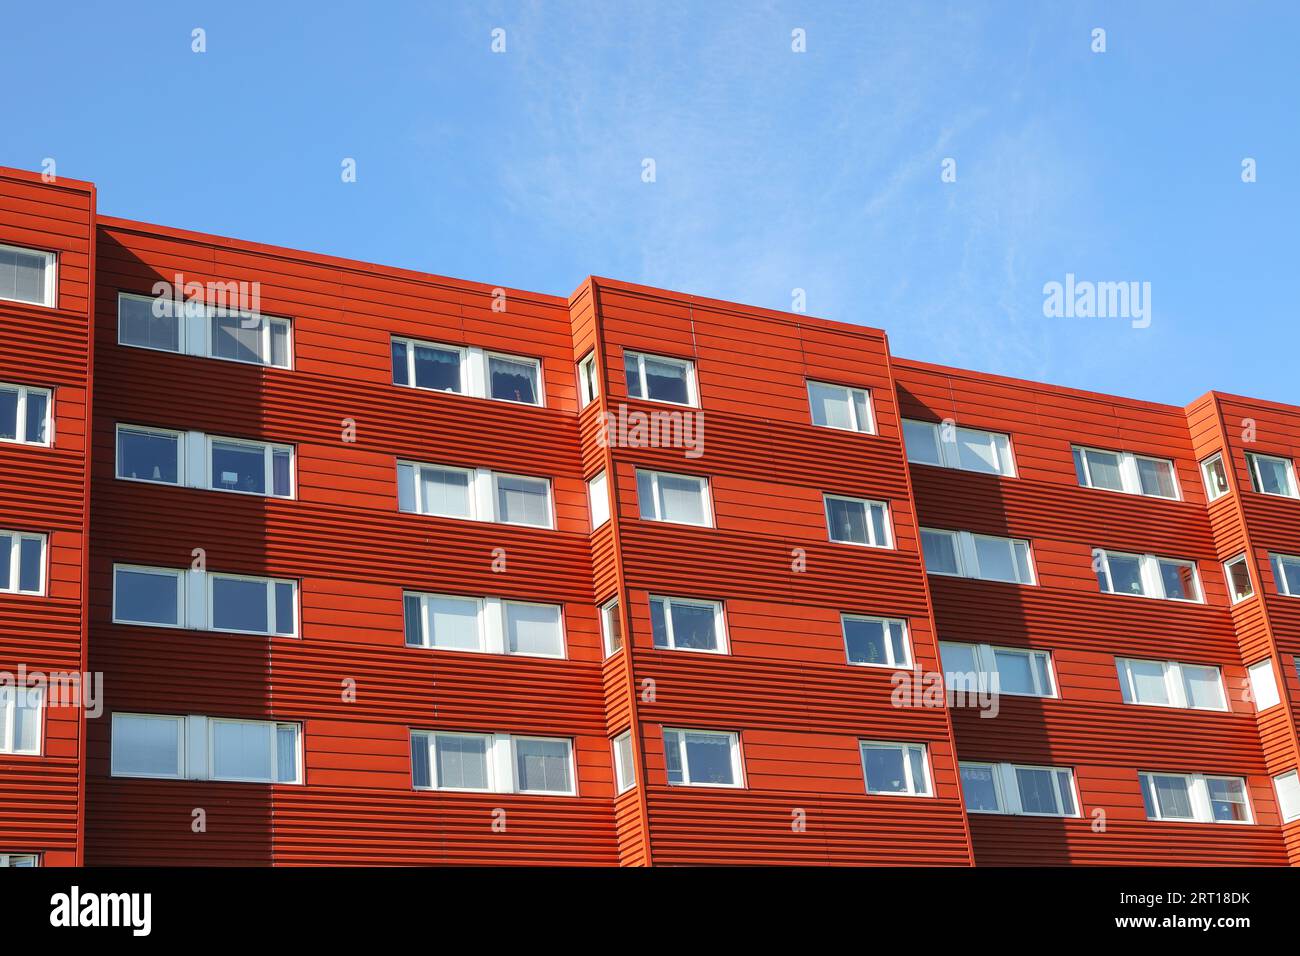 Exterior of a red colored multi-storey building with apartments built in the early 1970s. Stock Photo